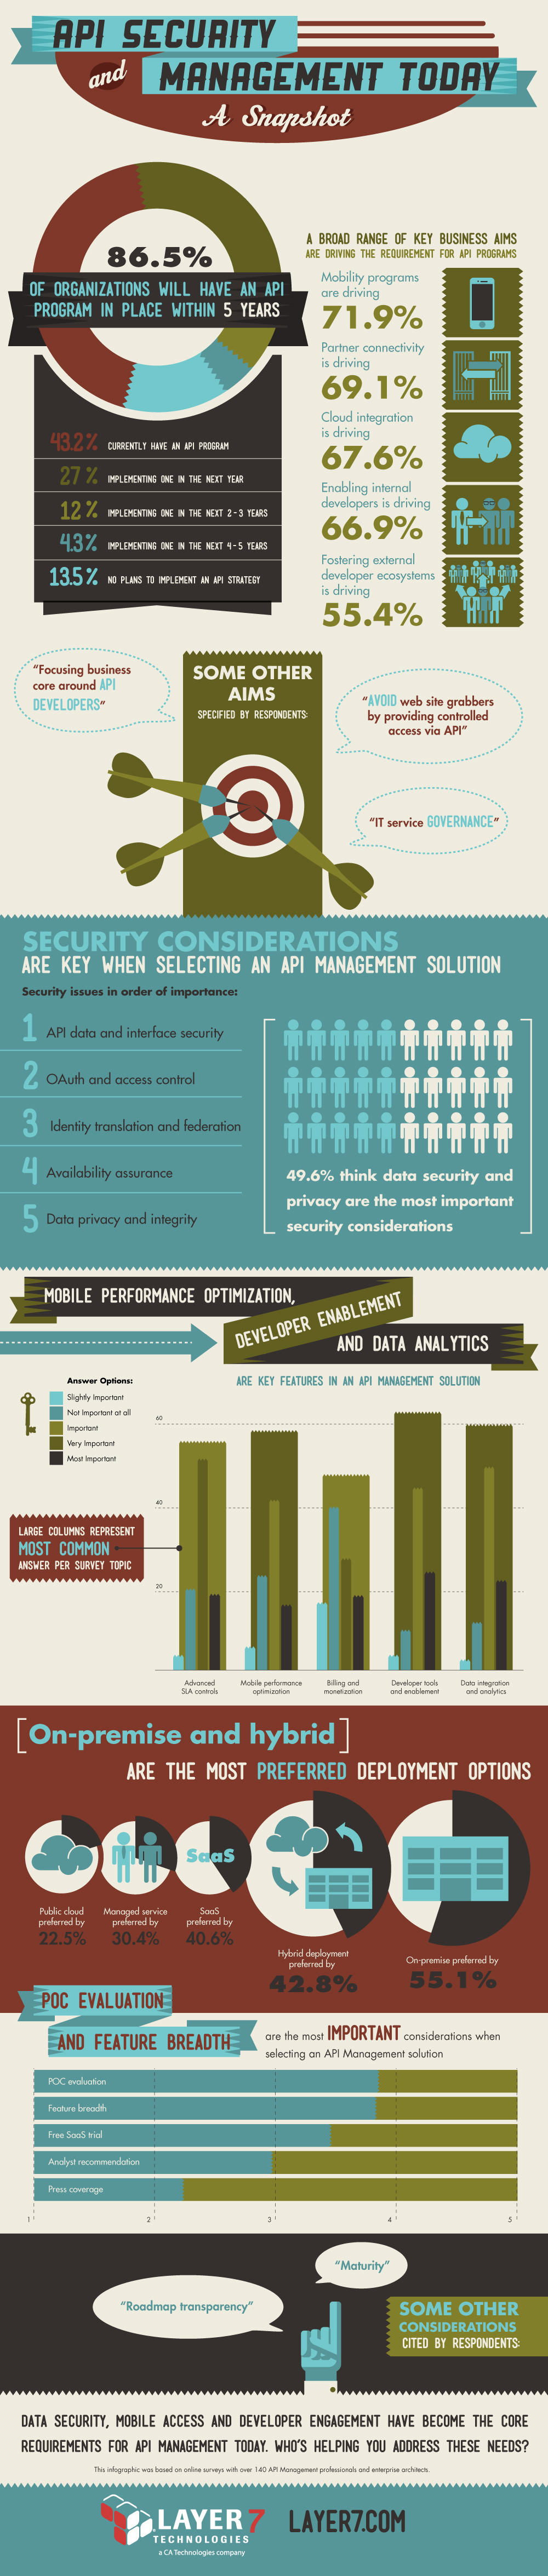 layer-7_api-security-mgmt-infographic_embargoed_07-31-13